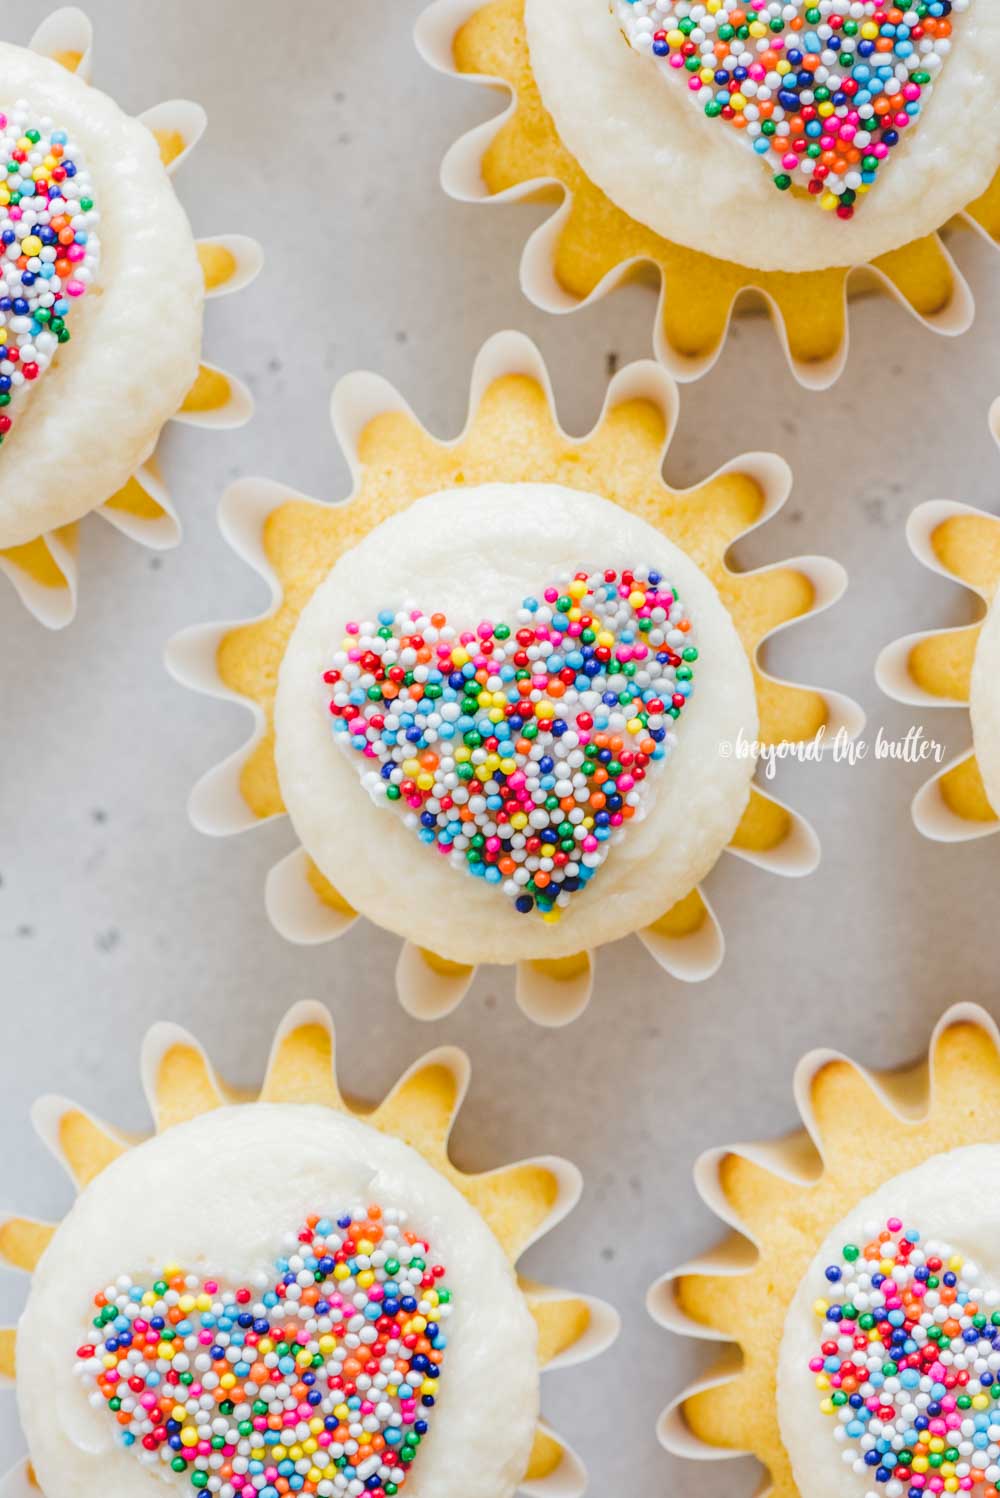 Overhead image of sprinkled heart cupcakes on white/grya background | All Images © Beyond the Butter™